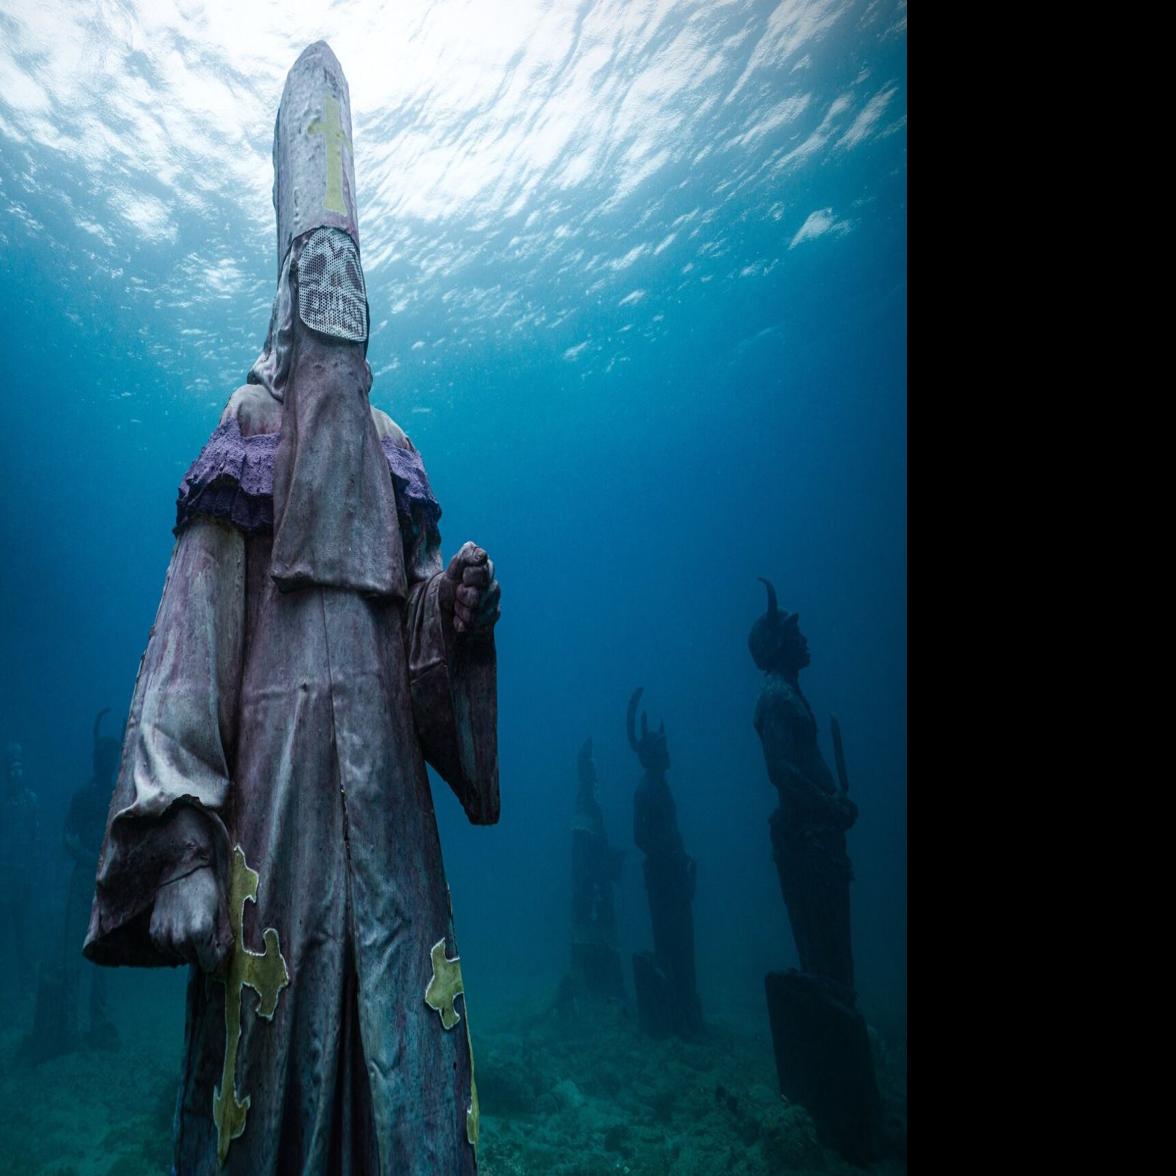 Home - Underwater Sculpture by Jason deCaires Taylor